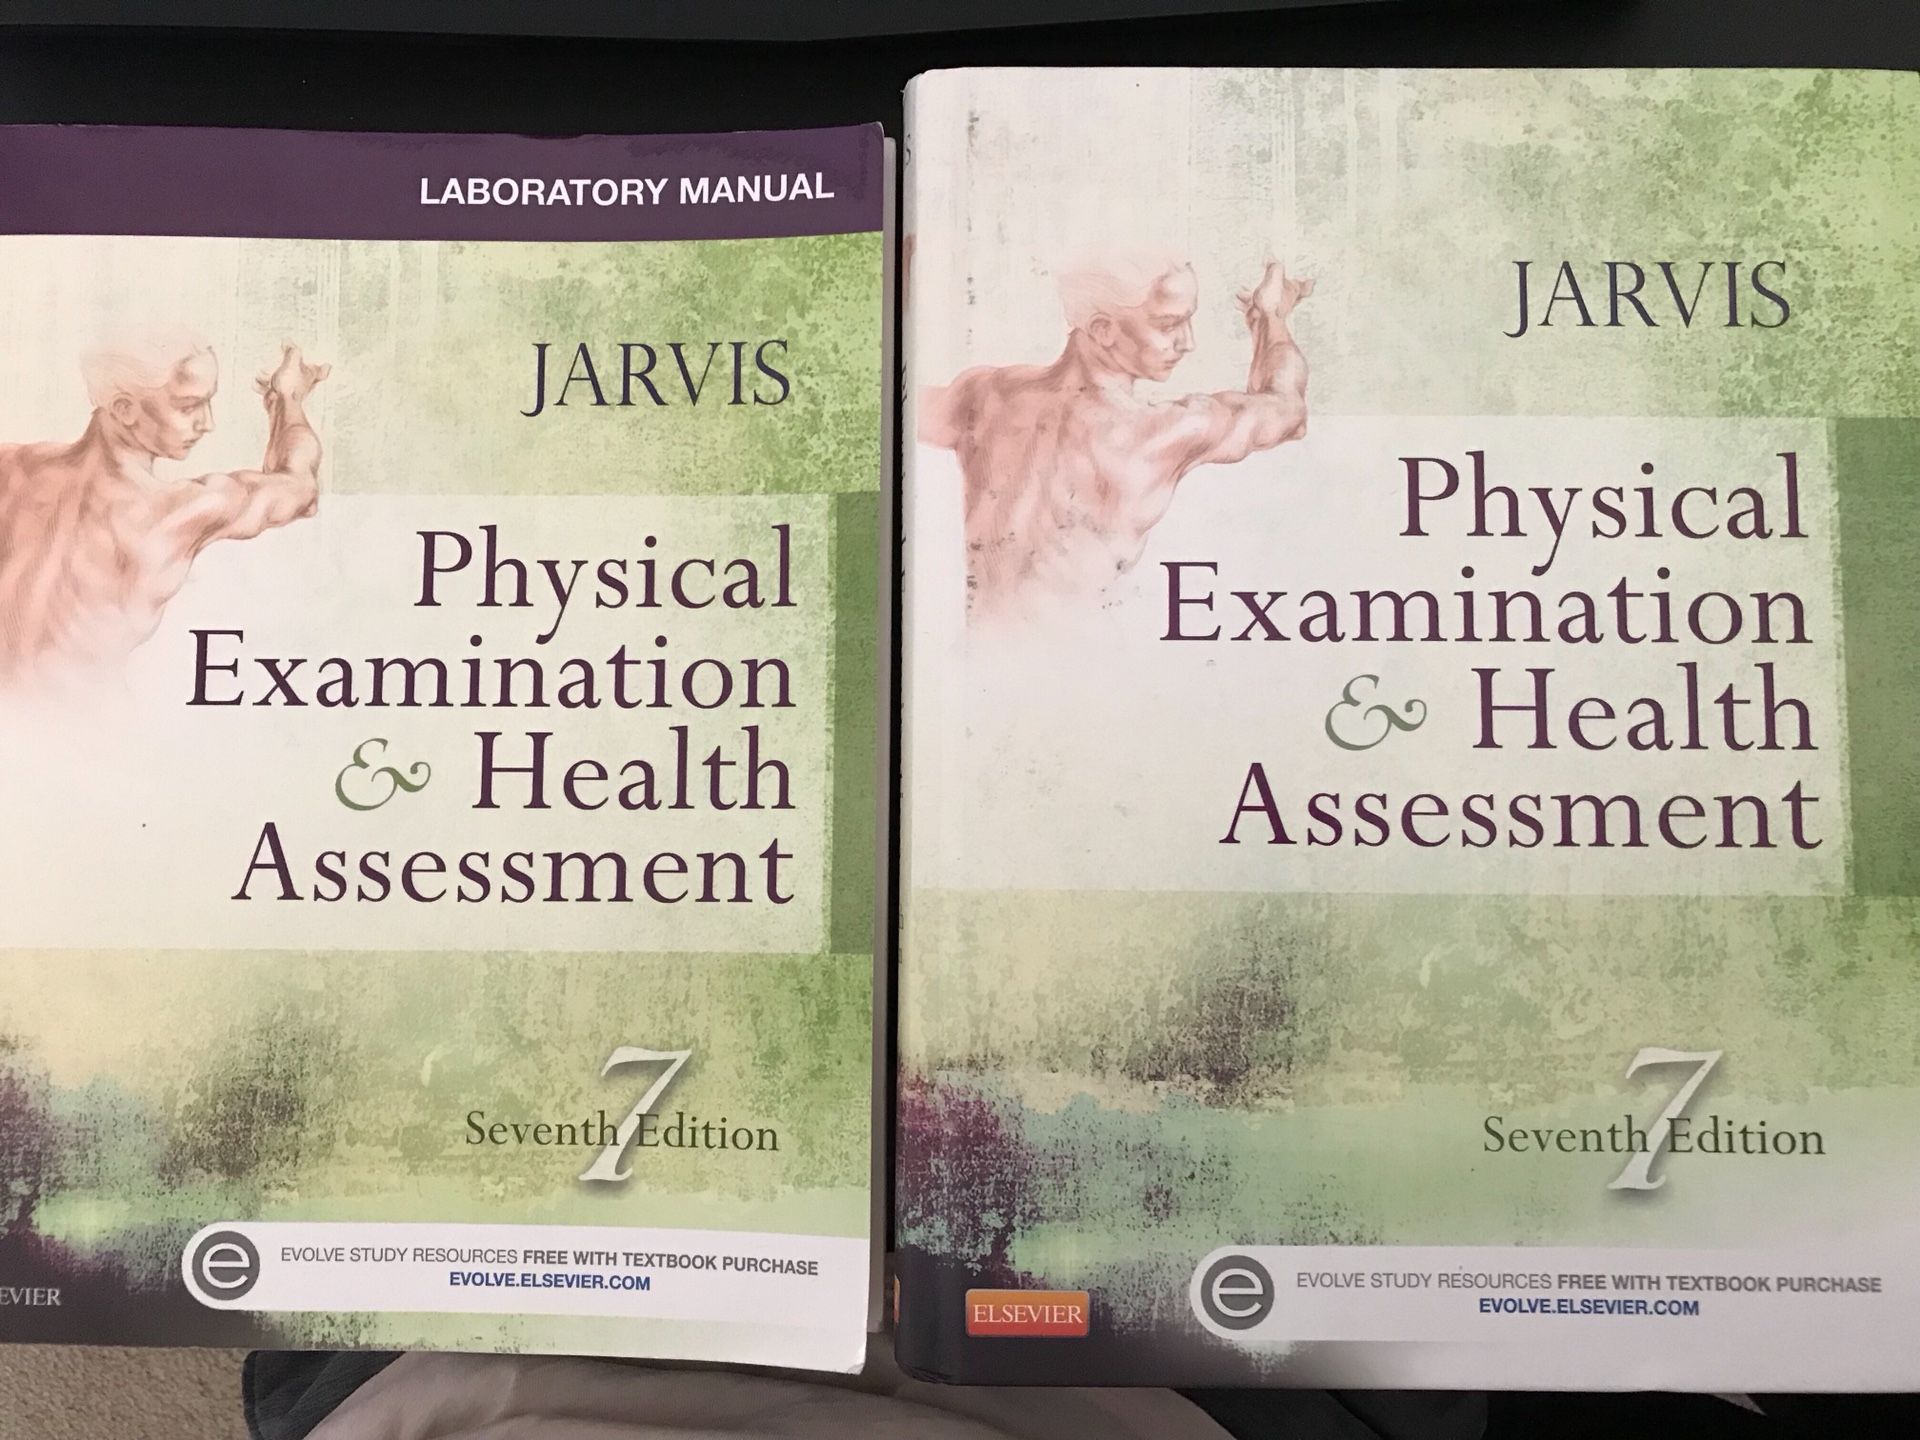 Jarvis Physical Examination Books